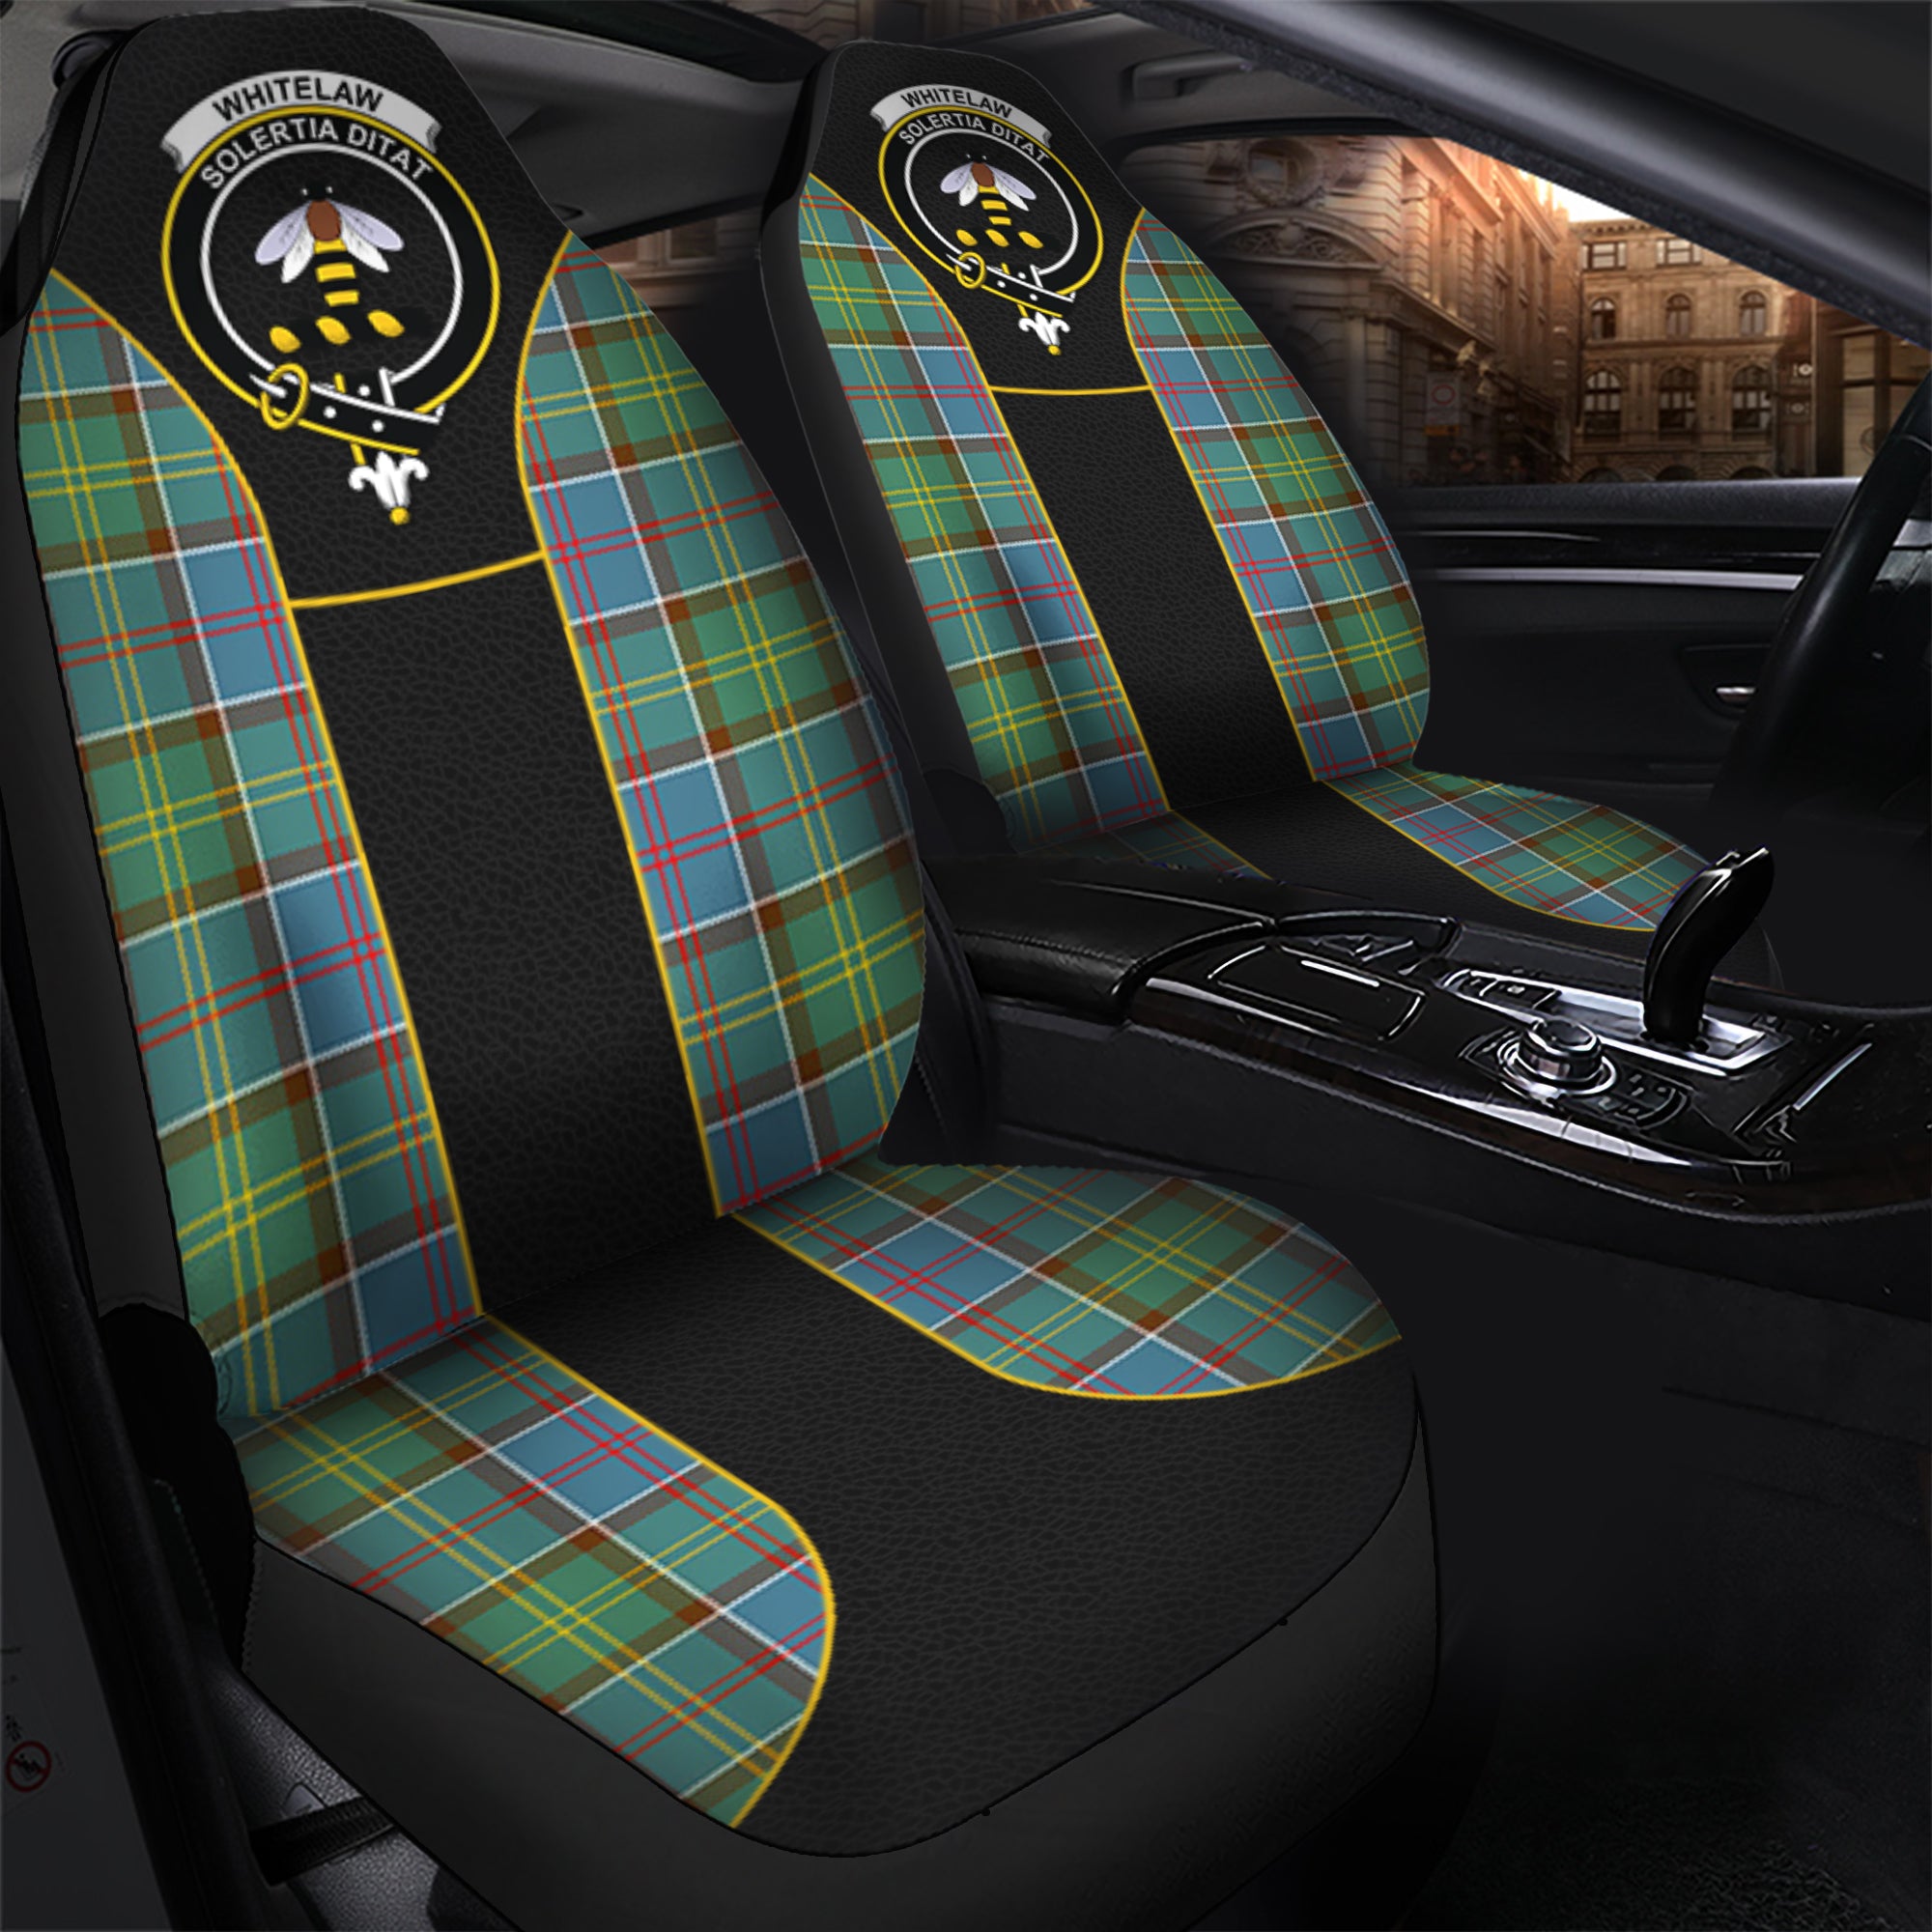 scottish-whitelaw-tartan-crest-car-seat-cover-special-style